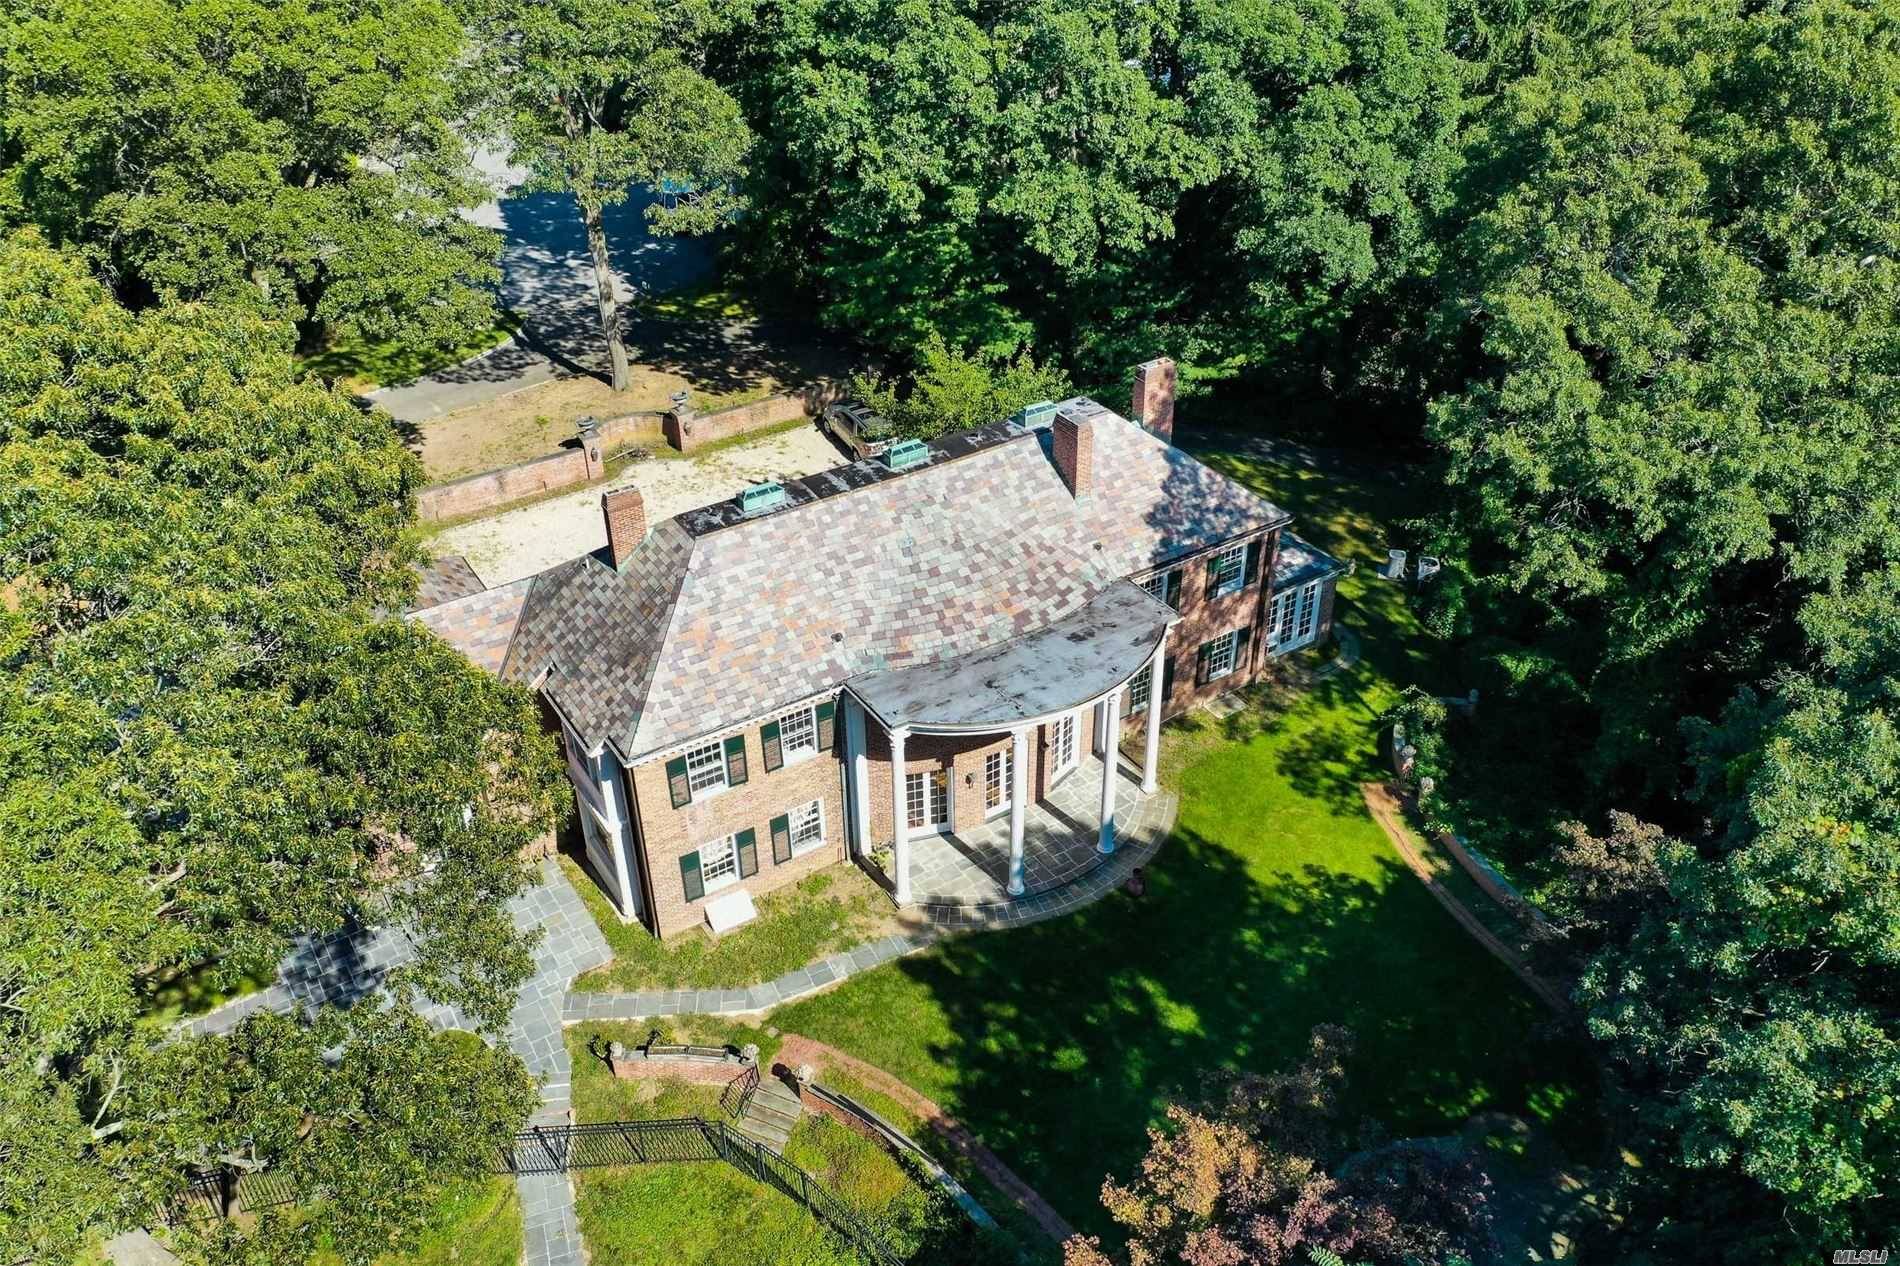 Majestic Brick Colonial Set On Over 2 Acres Of Lush Manicured Property Located In The Enclave Of Laurel Hollow Community.